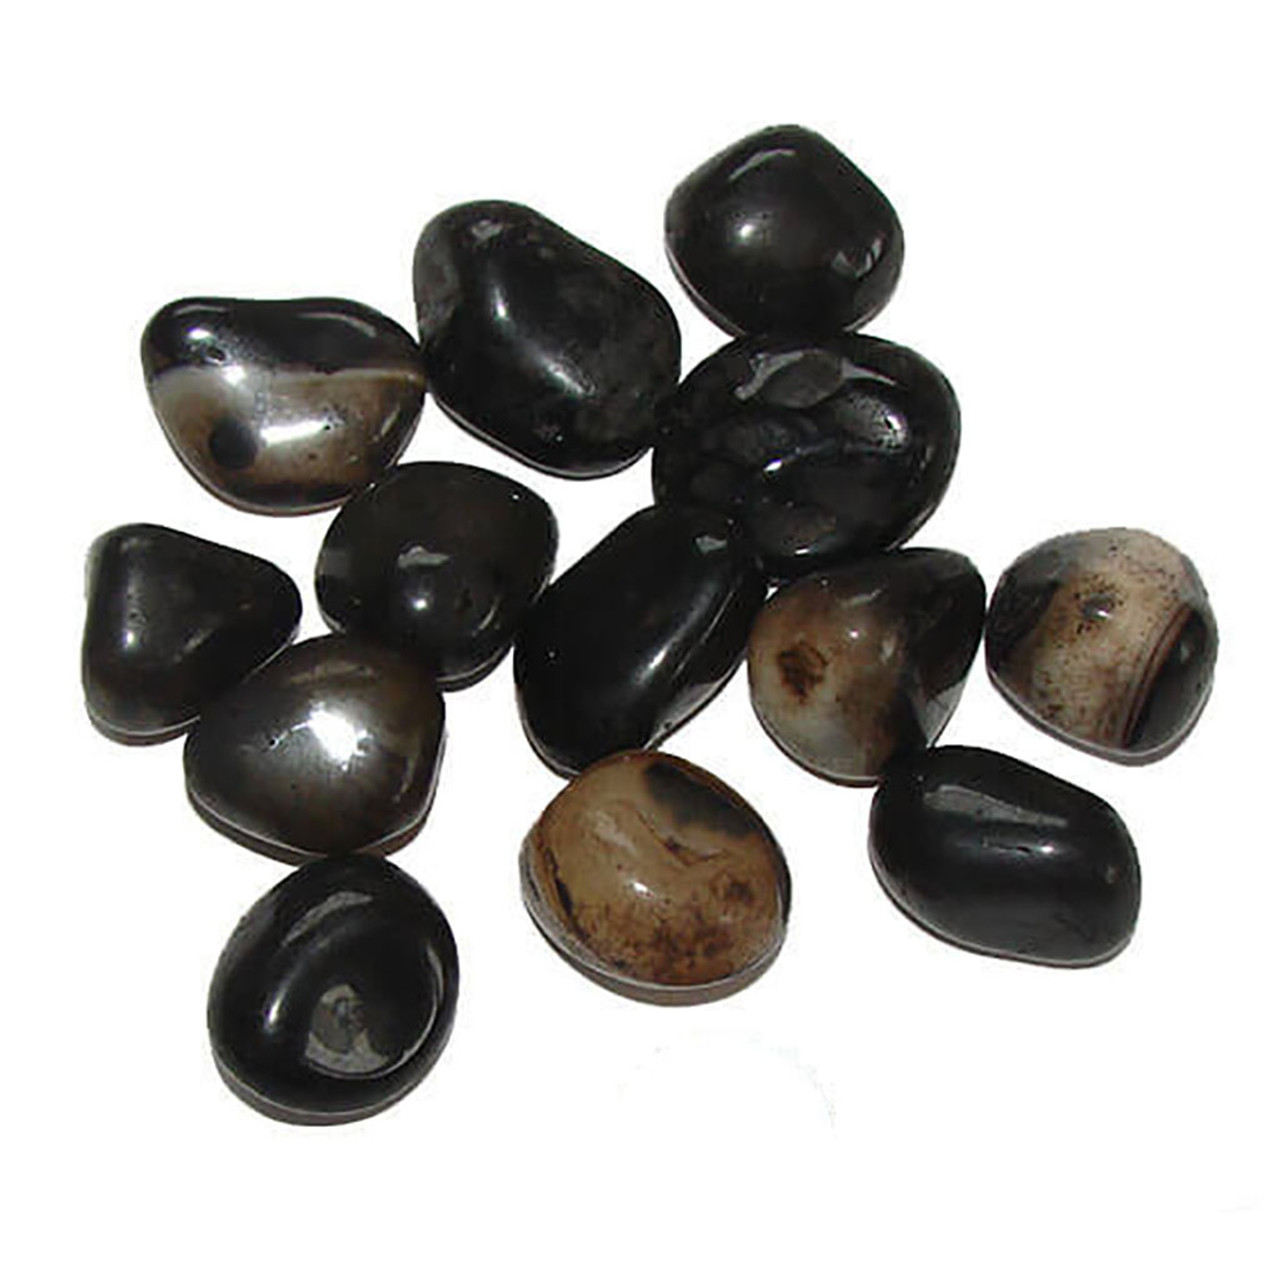 The Meaning of - Black Onyx Stones for Sale